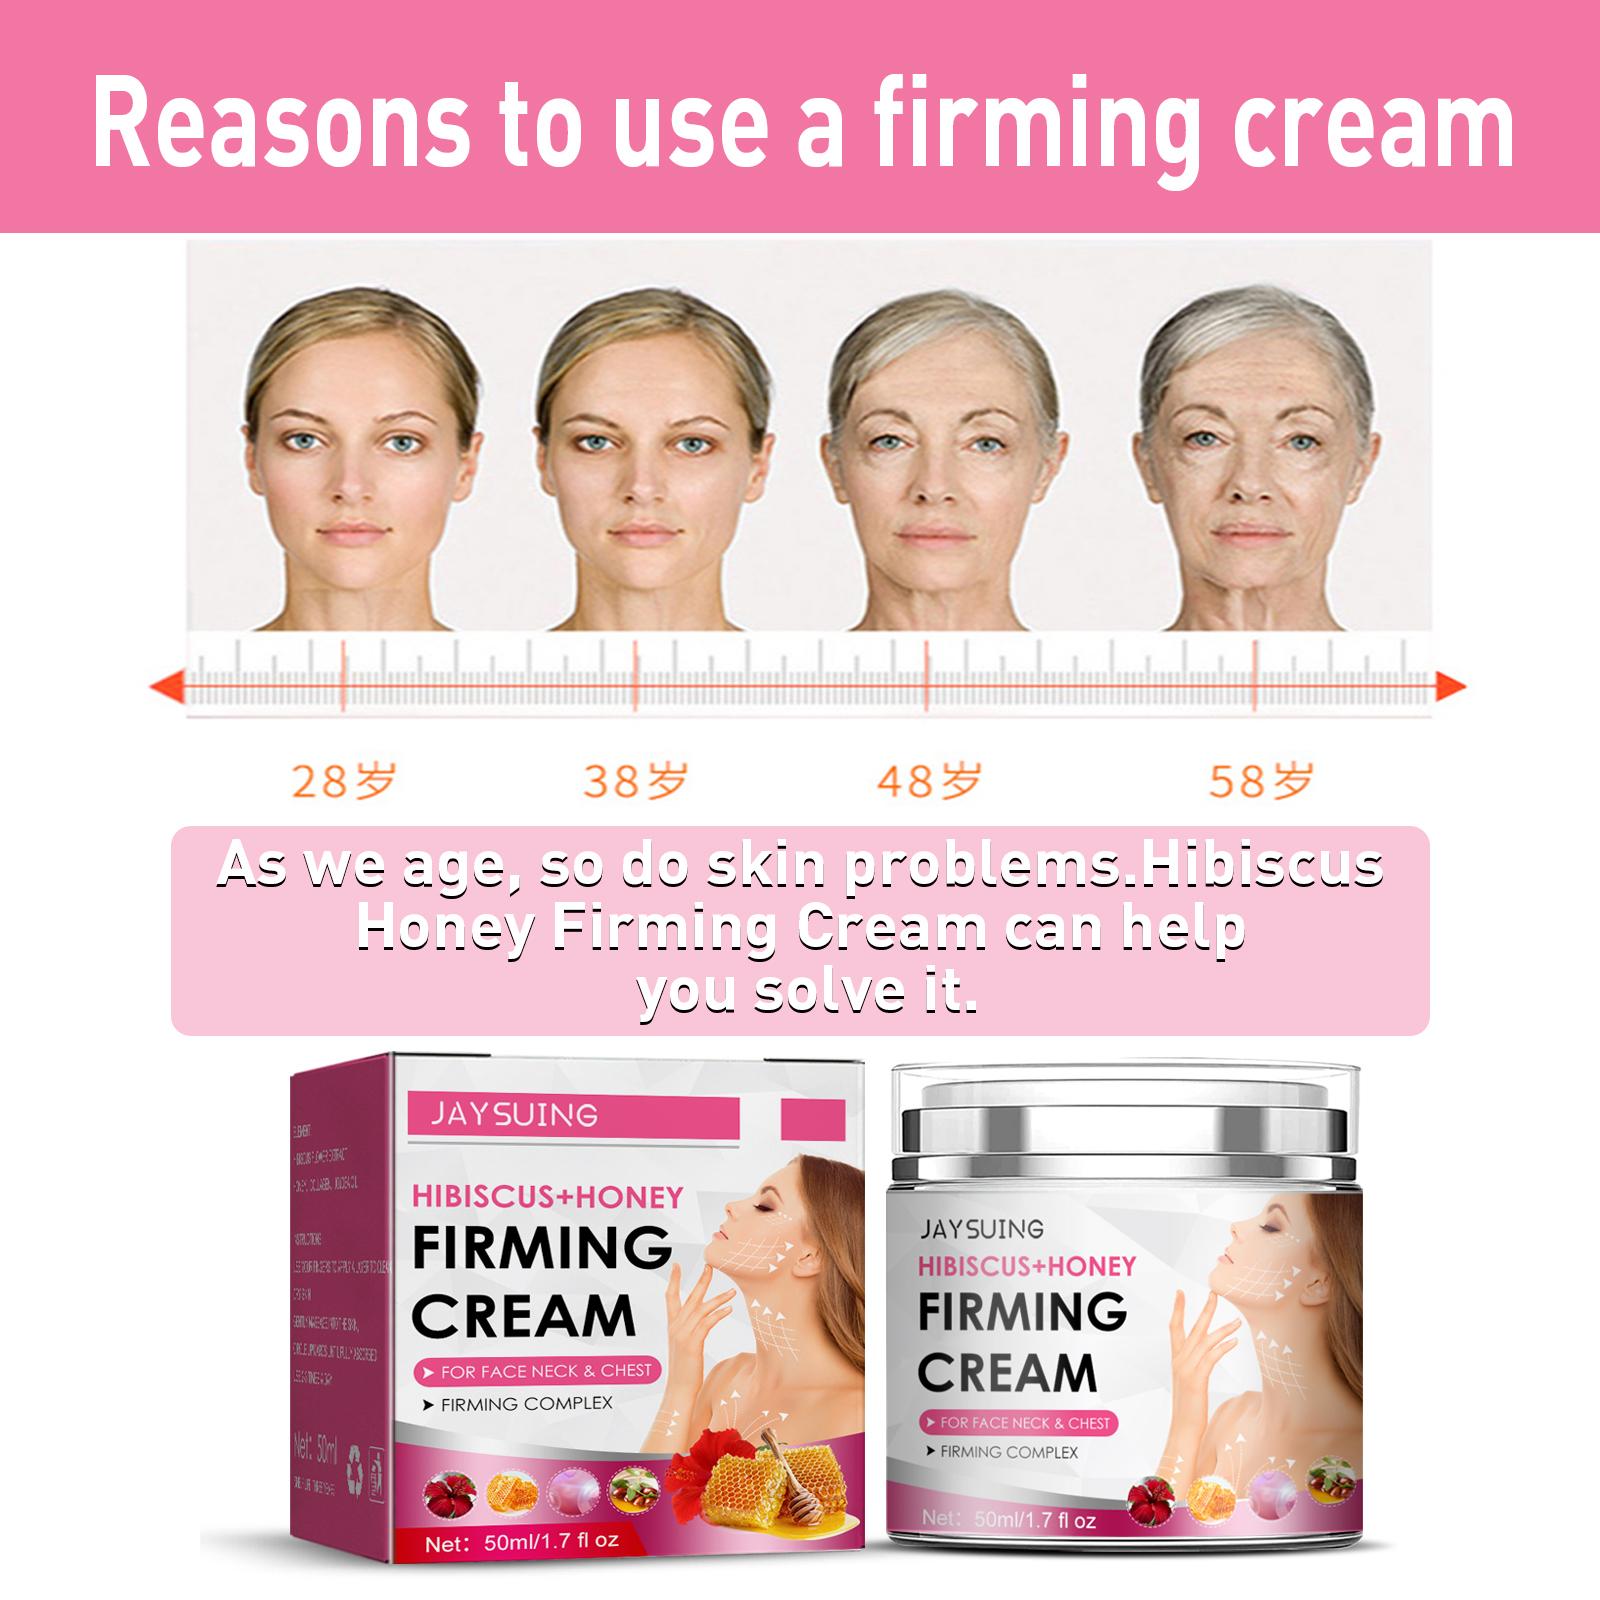 hibiscus and honey firming cream use 